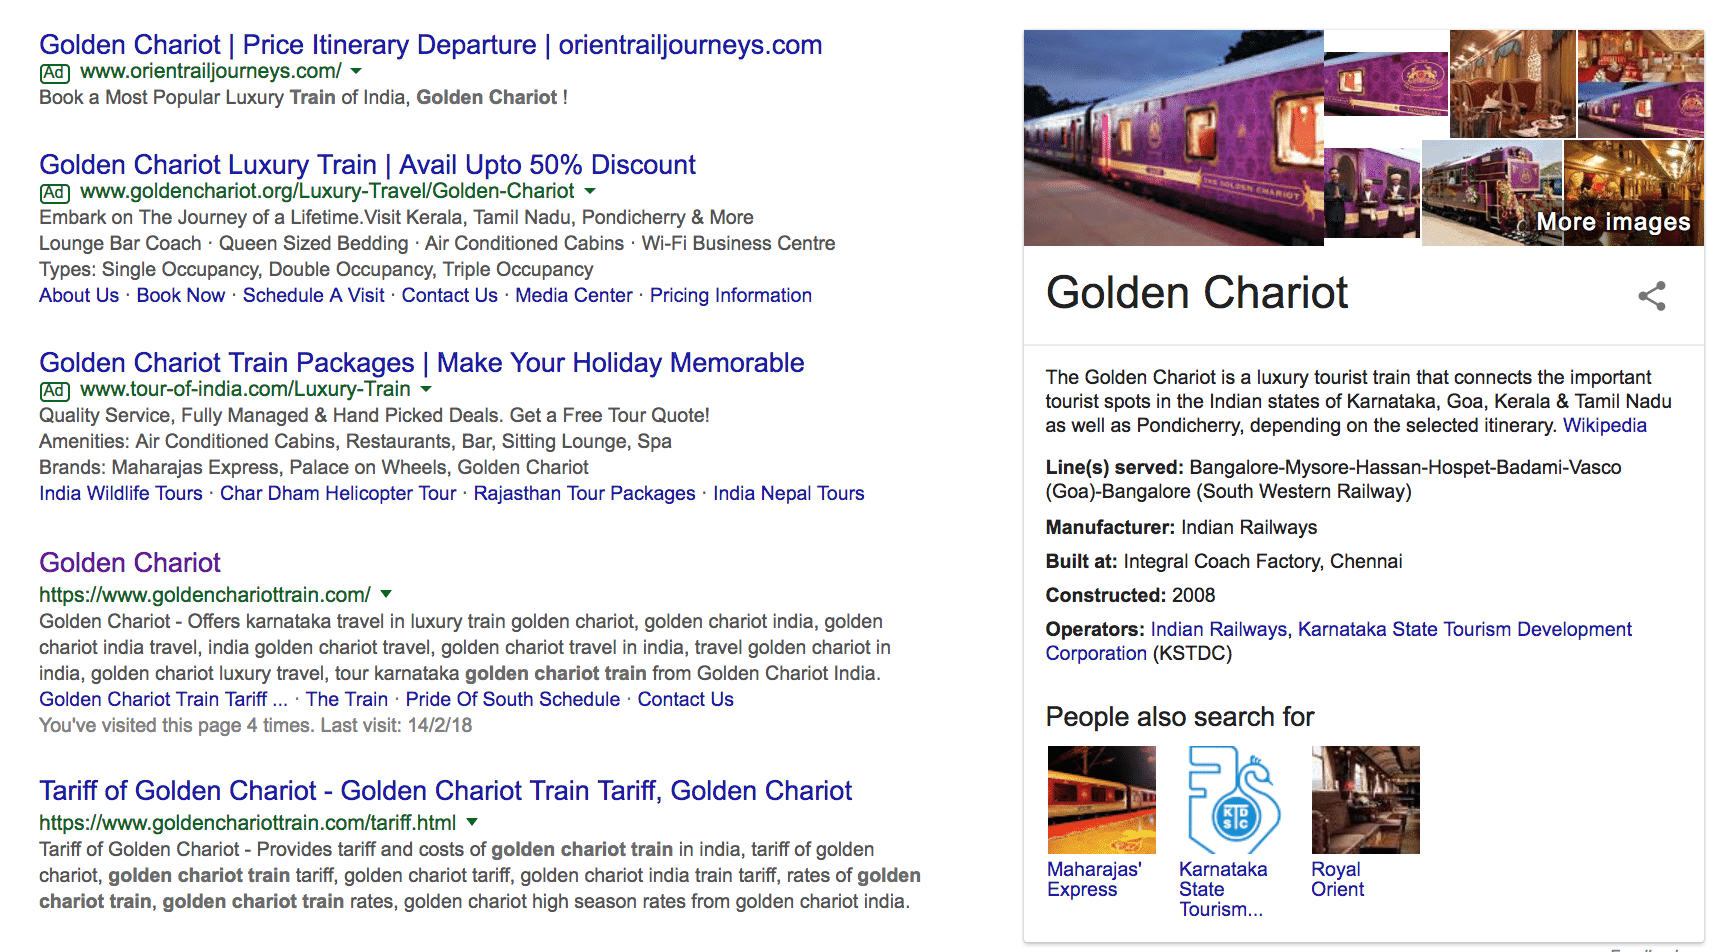 Example of a Google search for the Golden Chariot